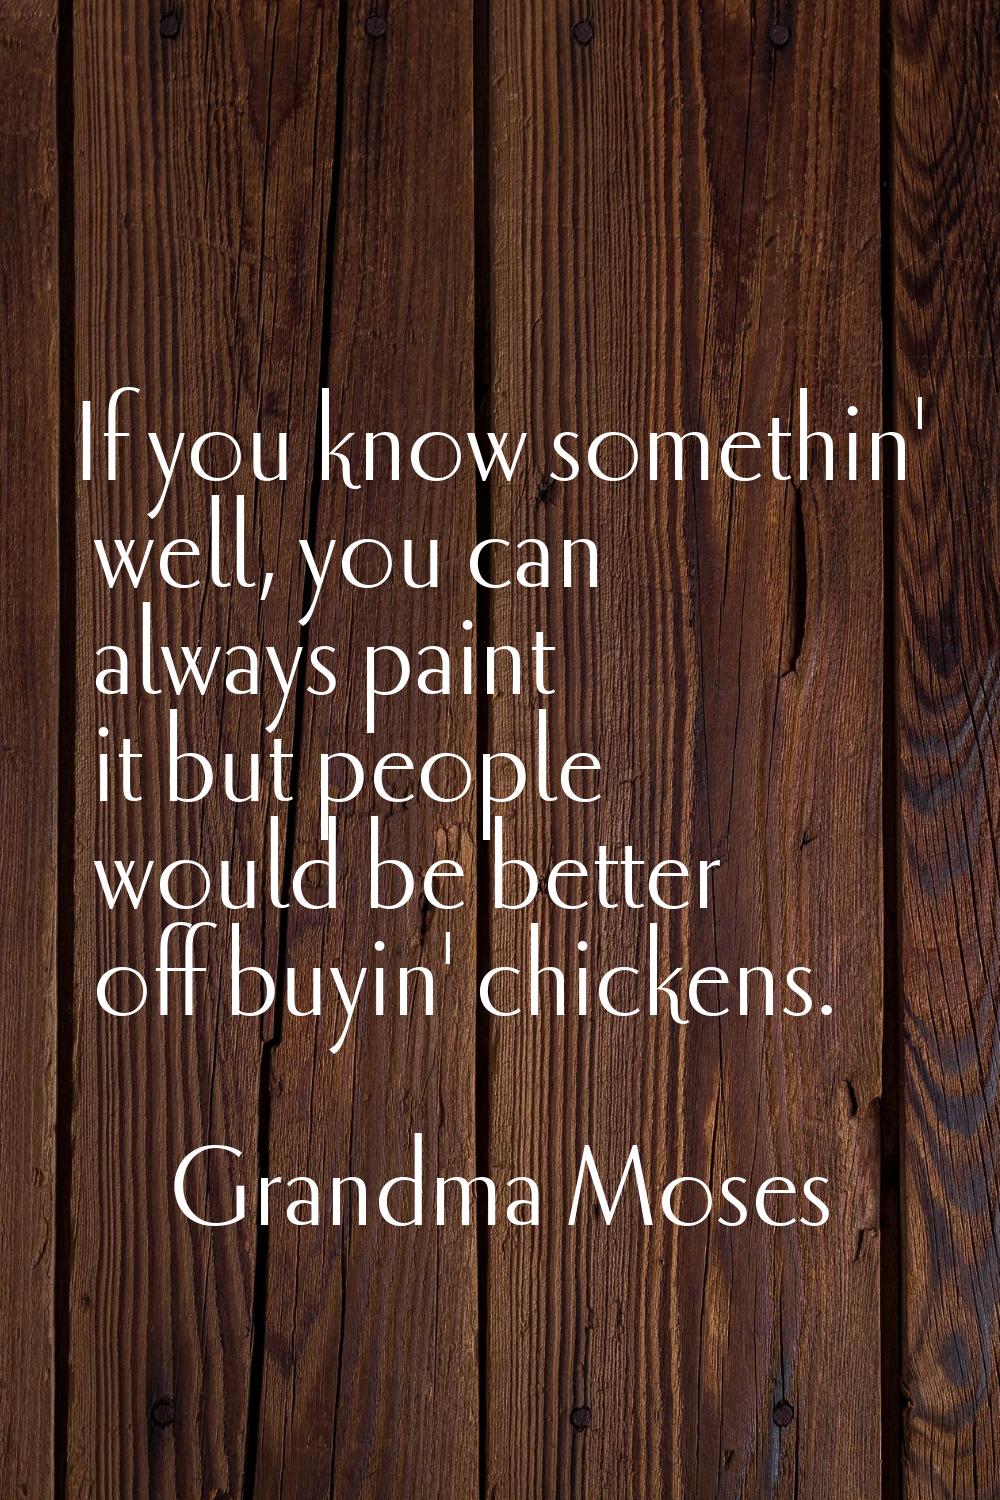 If you know somethin' well, you can always paint it but people would be better off buyin' chickens.